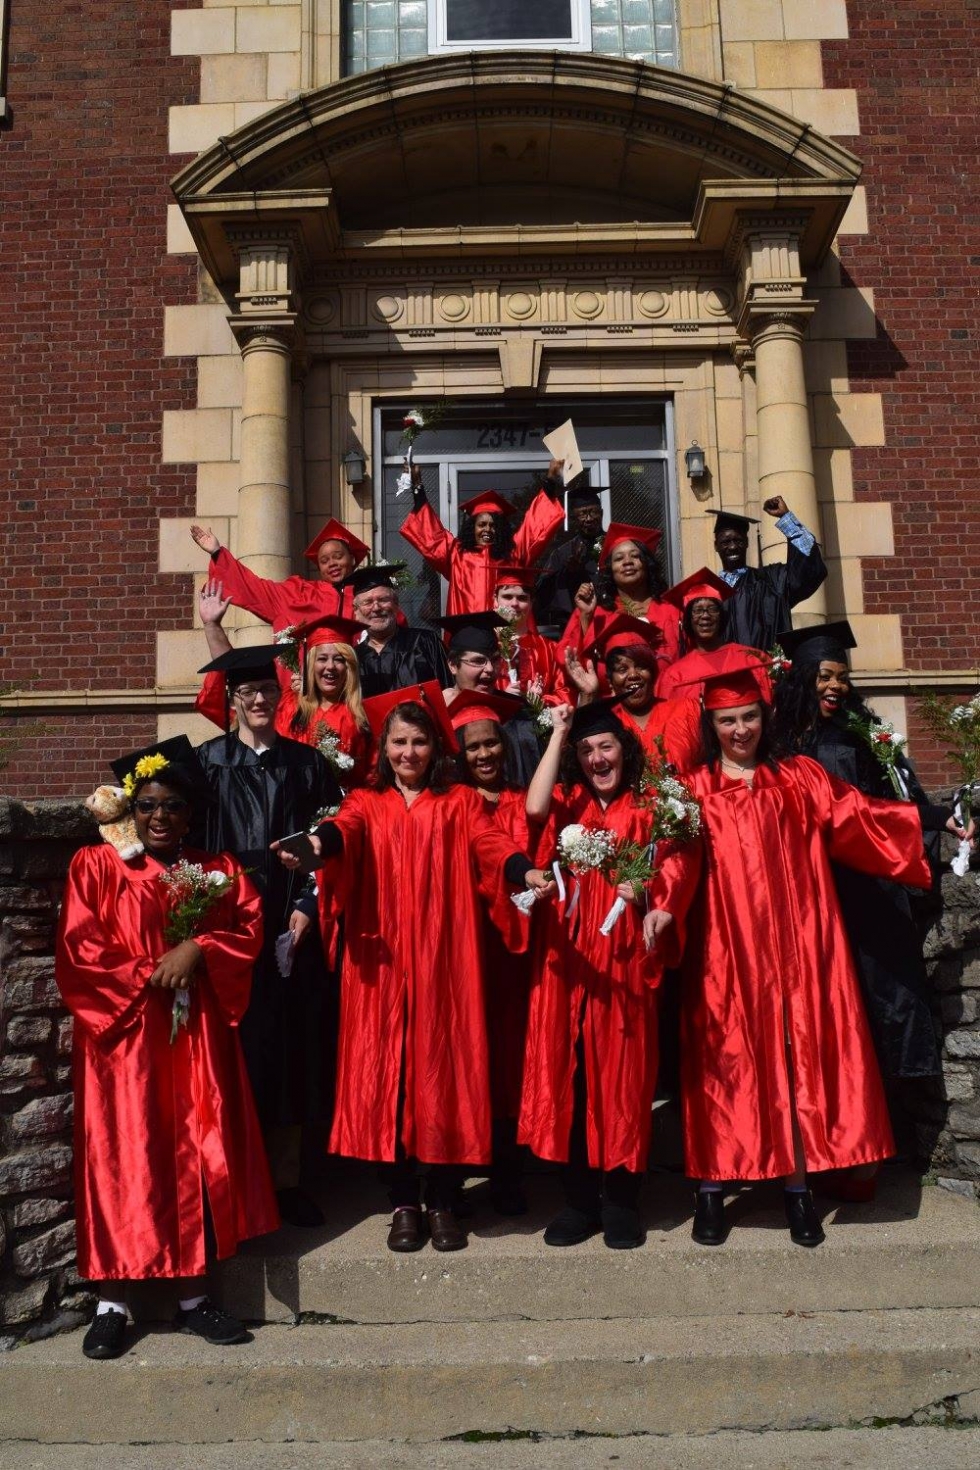 A group of people in graduation robes stand on the front steps of the IKRON building. Graduates are cheering, have arms extended, and look happy and celebratory.